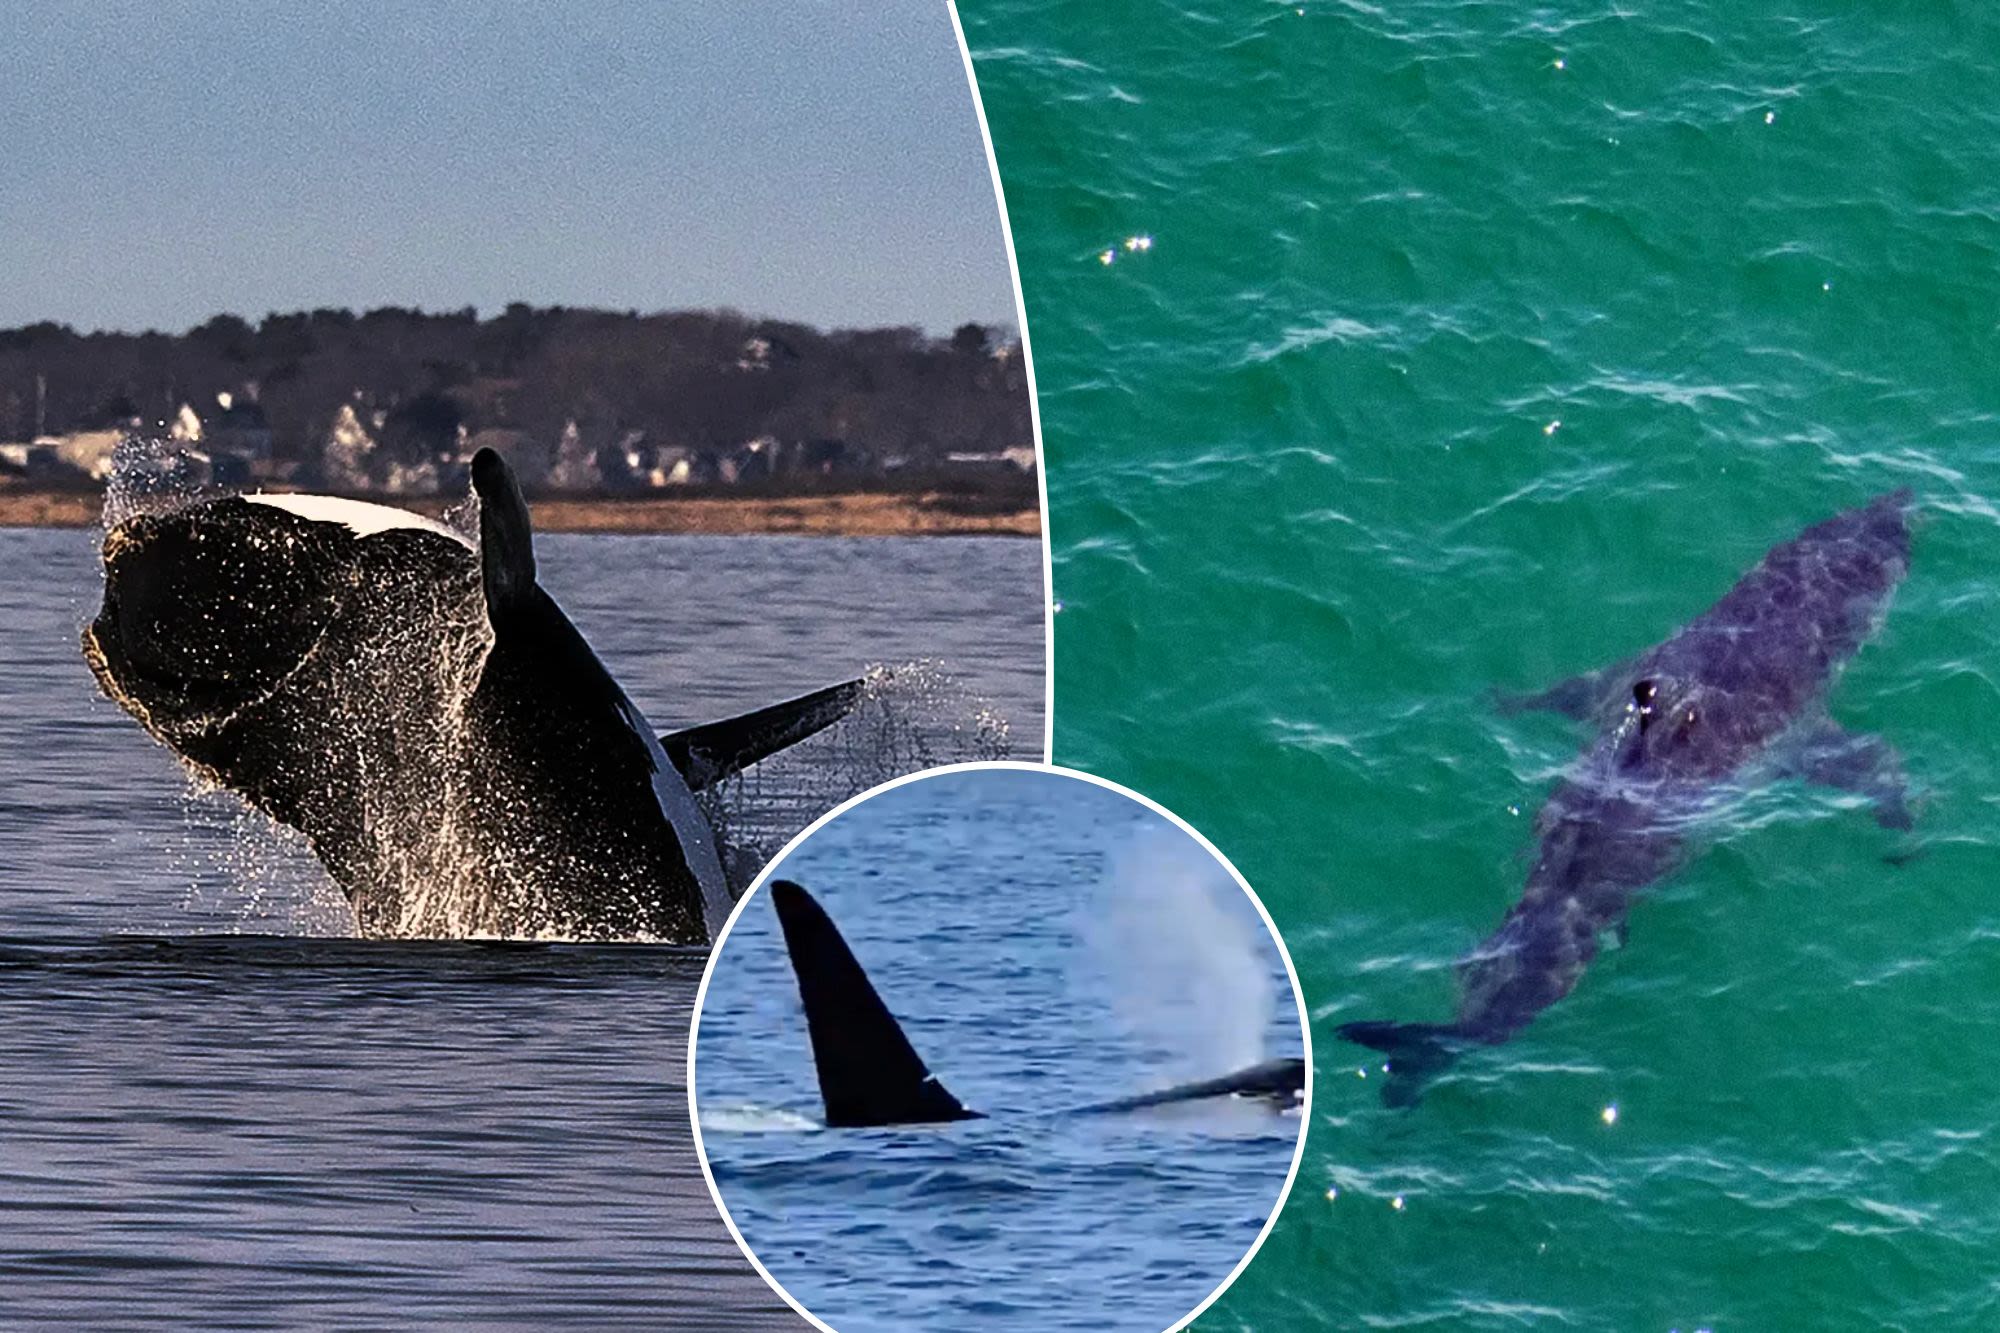 A turf war could be brewing between sharks and orcas off Cape Cod: scientists